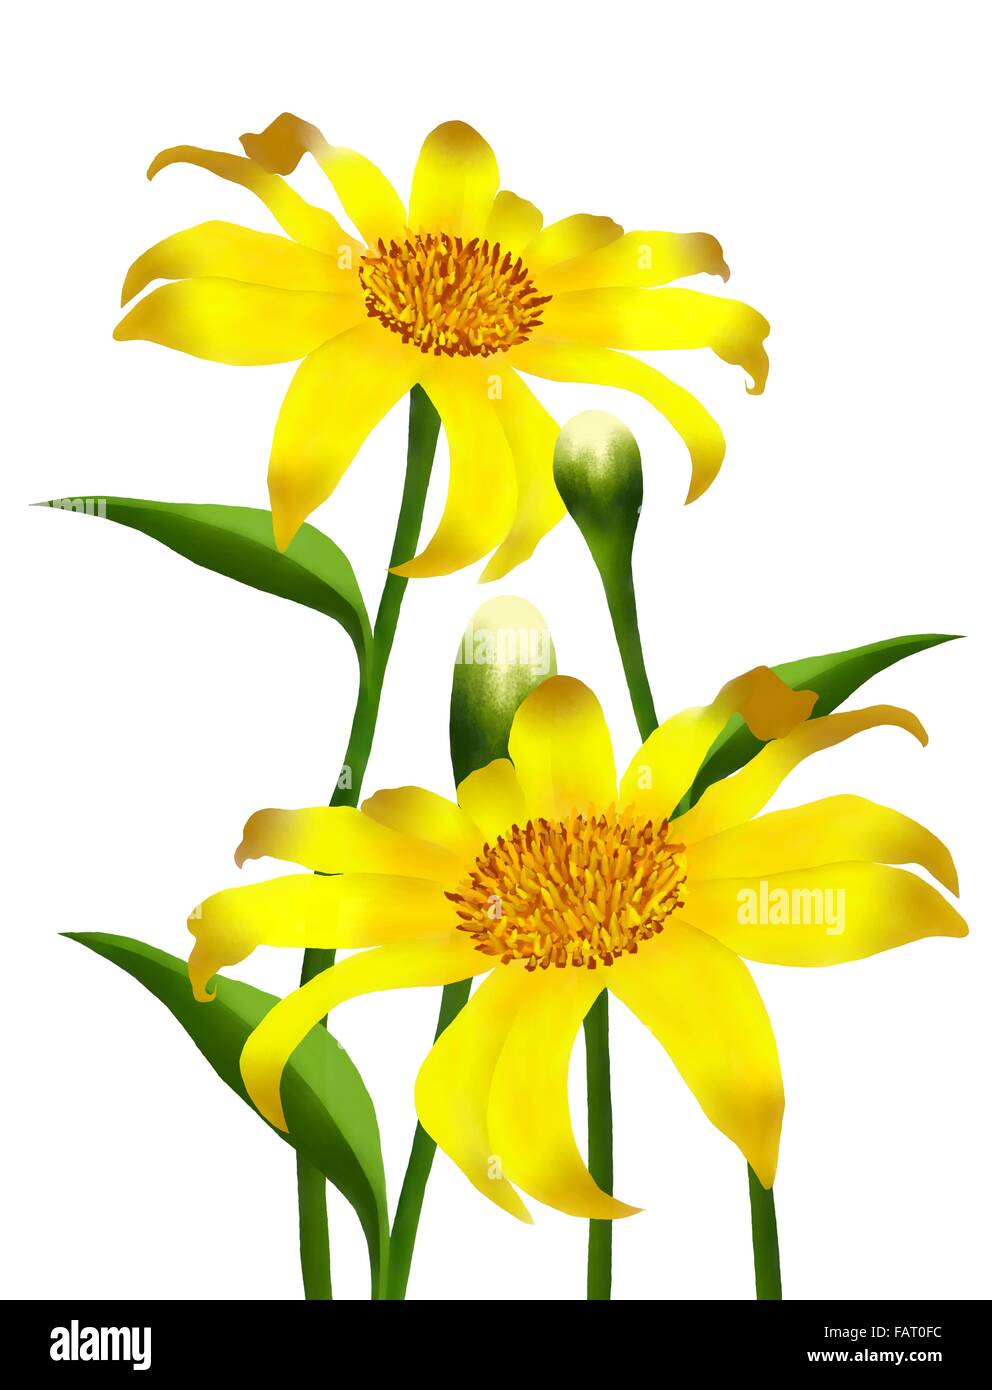 Hand Drawing, The Bright and Beautiful Yellow Colors of Mexican Sunflowers or Tithonia Rotundifolia Flowers Stock Photo